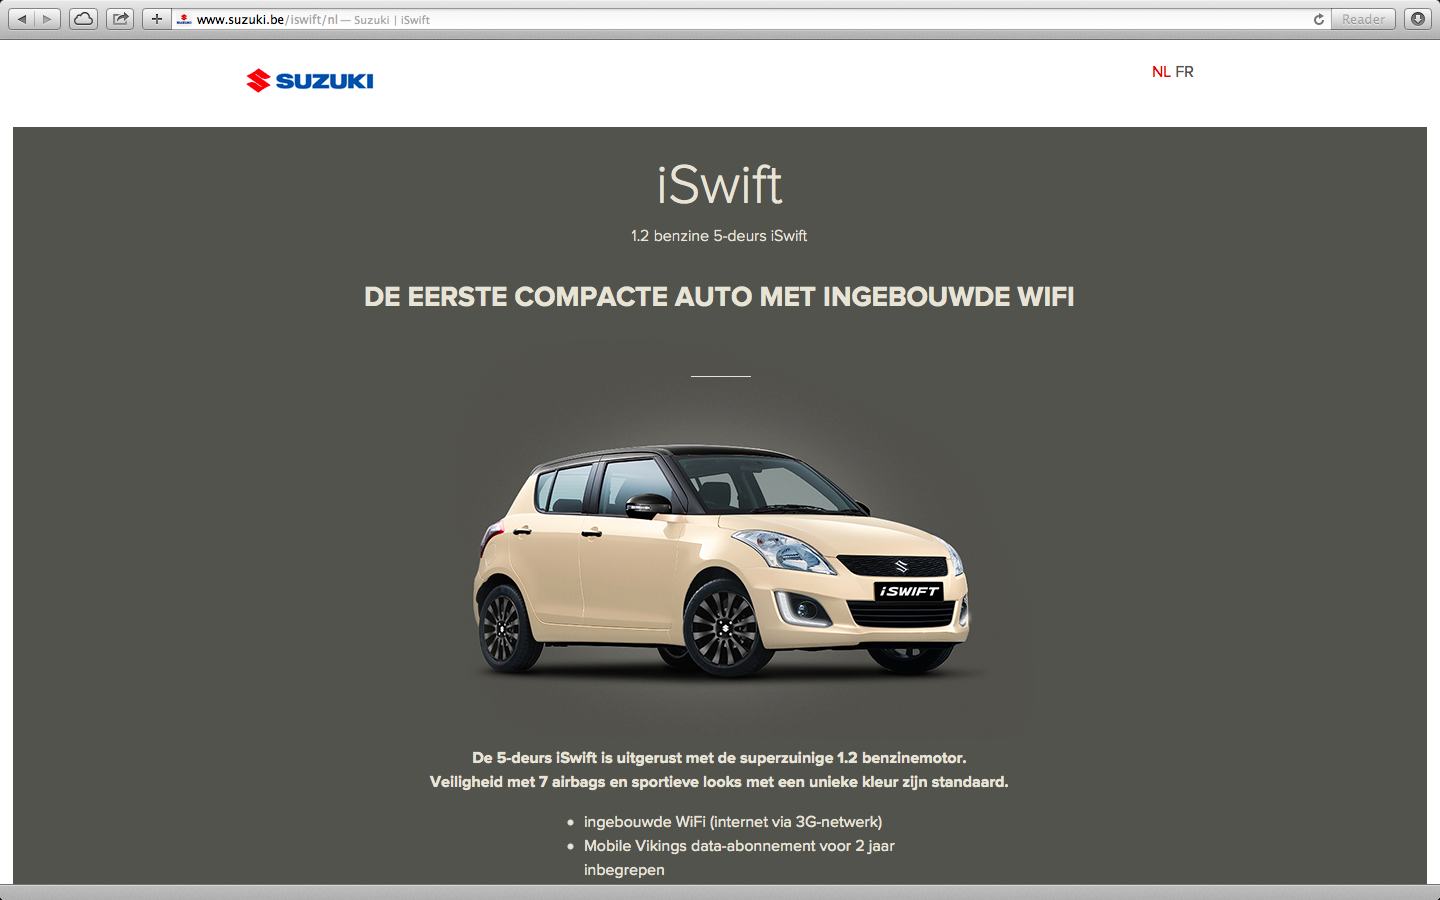 iswift the first e shop for a car debottomline